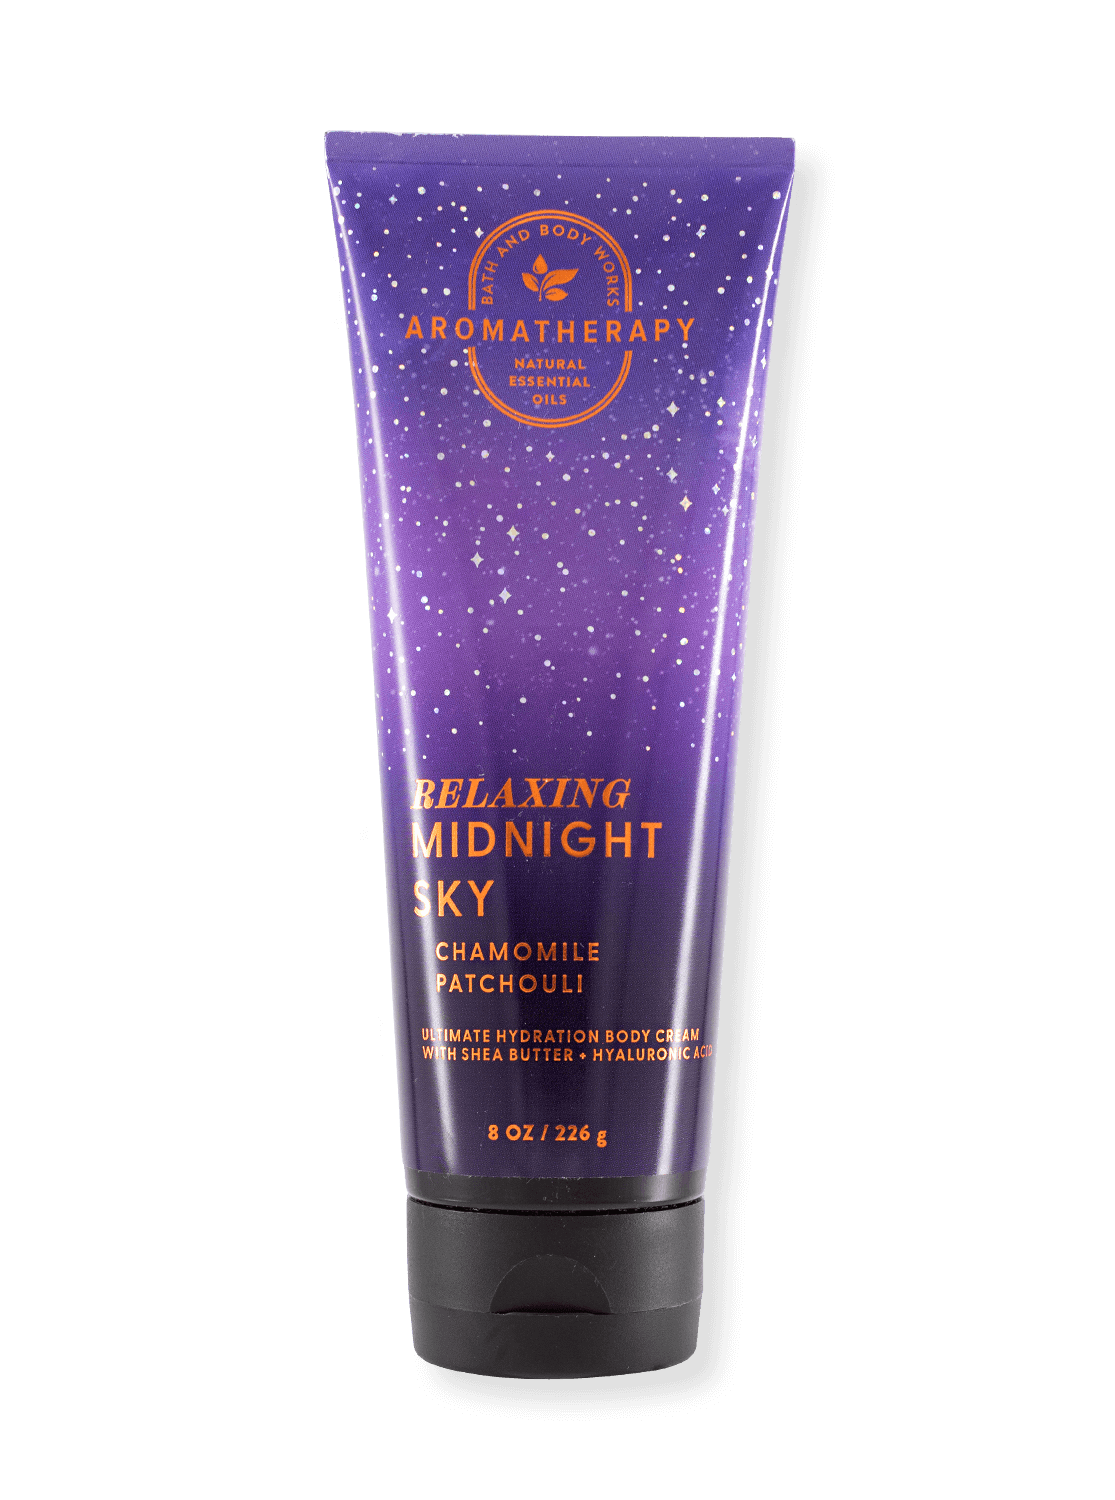 Body Cream - Aromatherapy - Relaxing Midnight Sky - Chamomile Patchouli - 226g